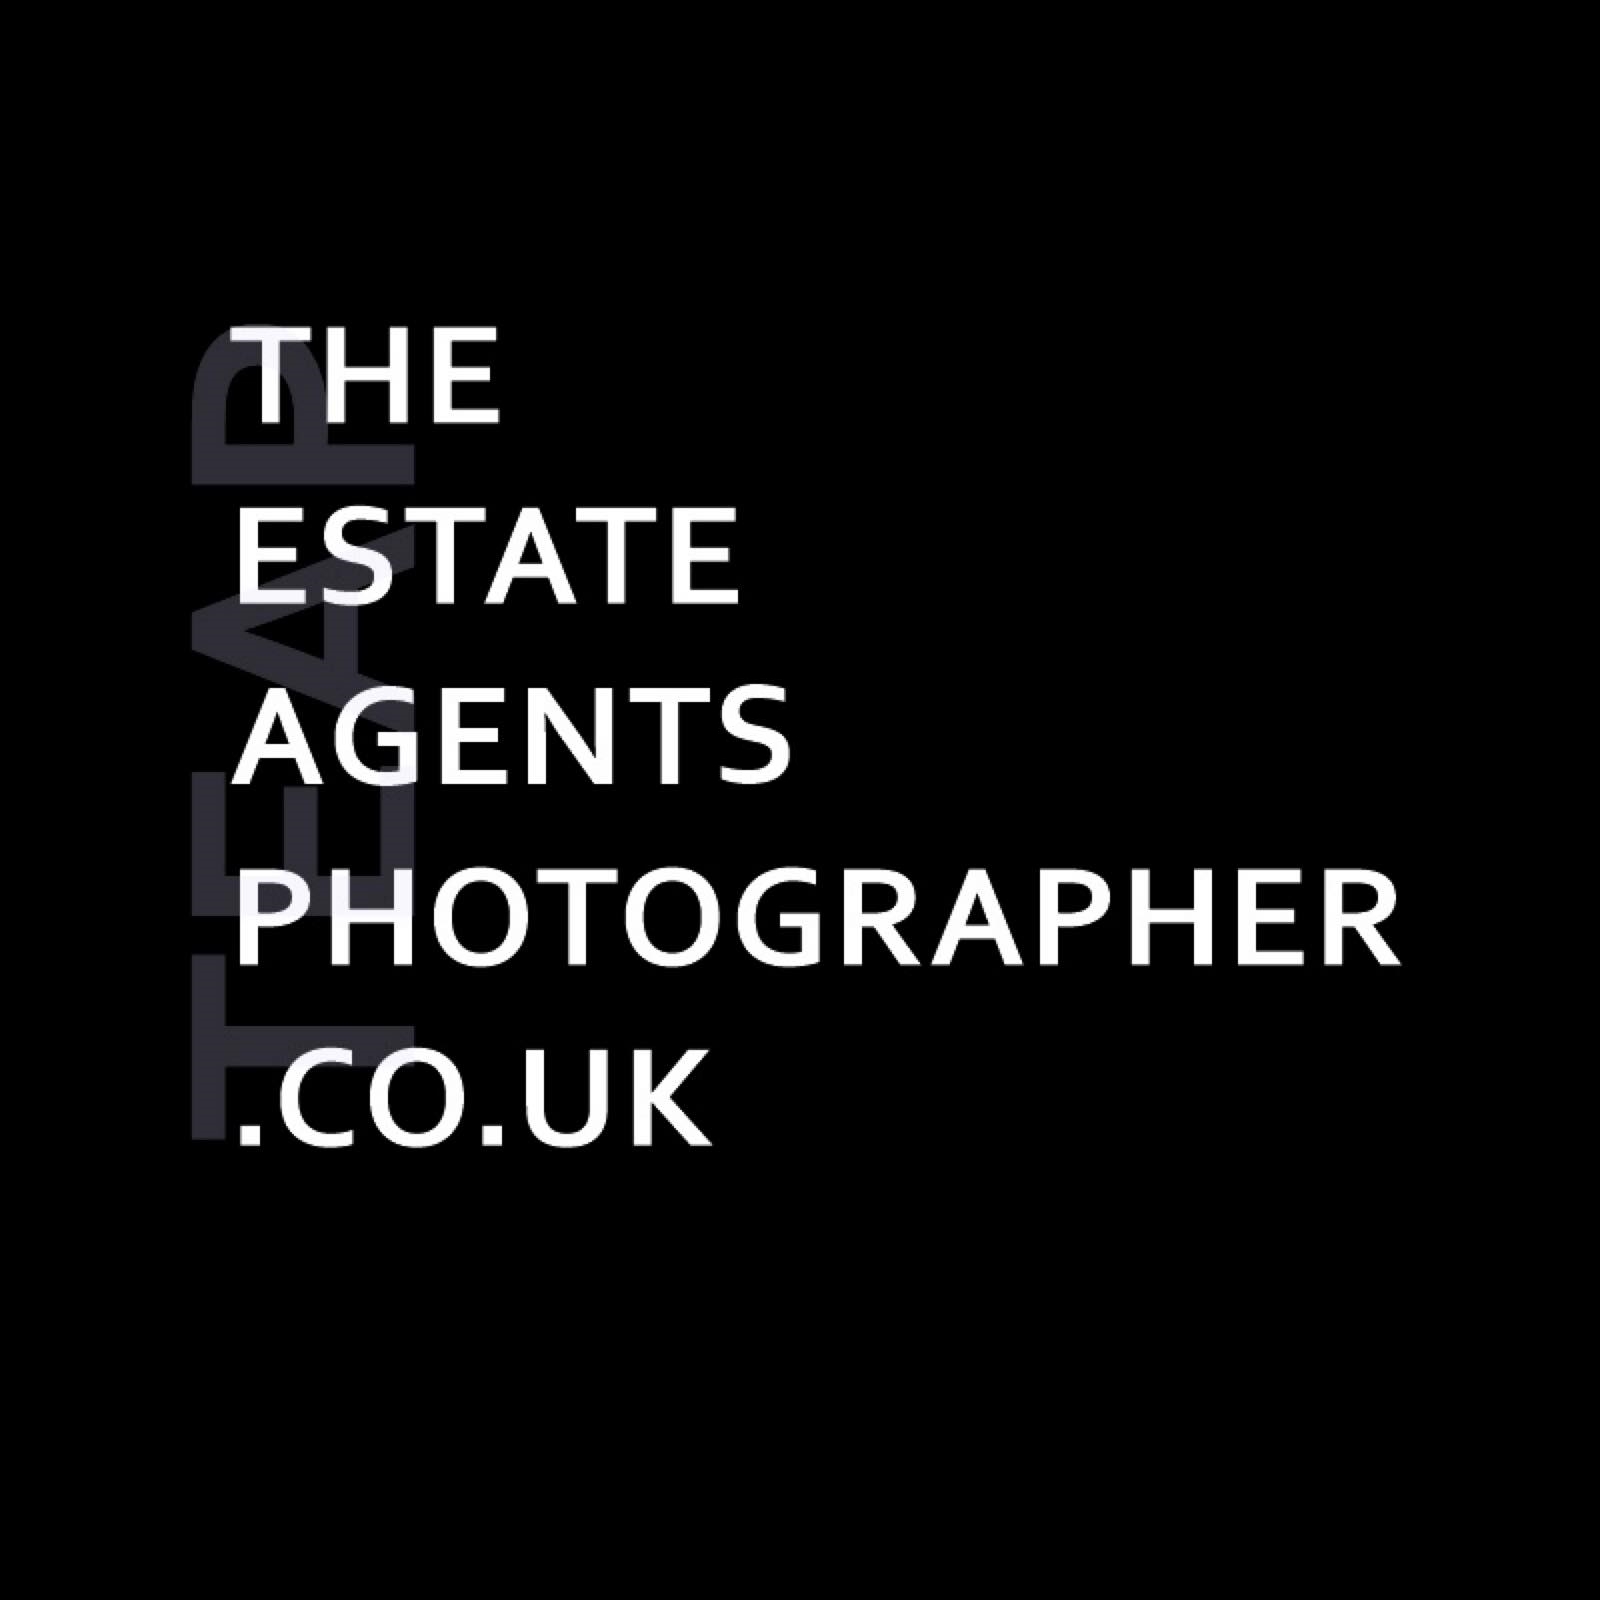 Logo of The Estate Agents Photographer